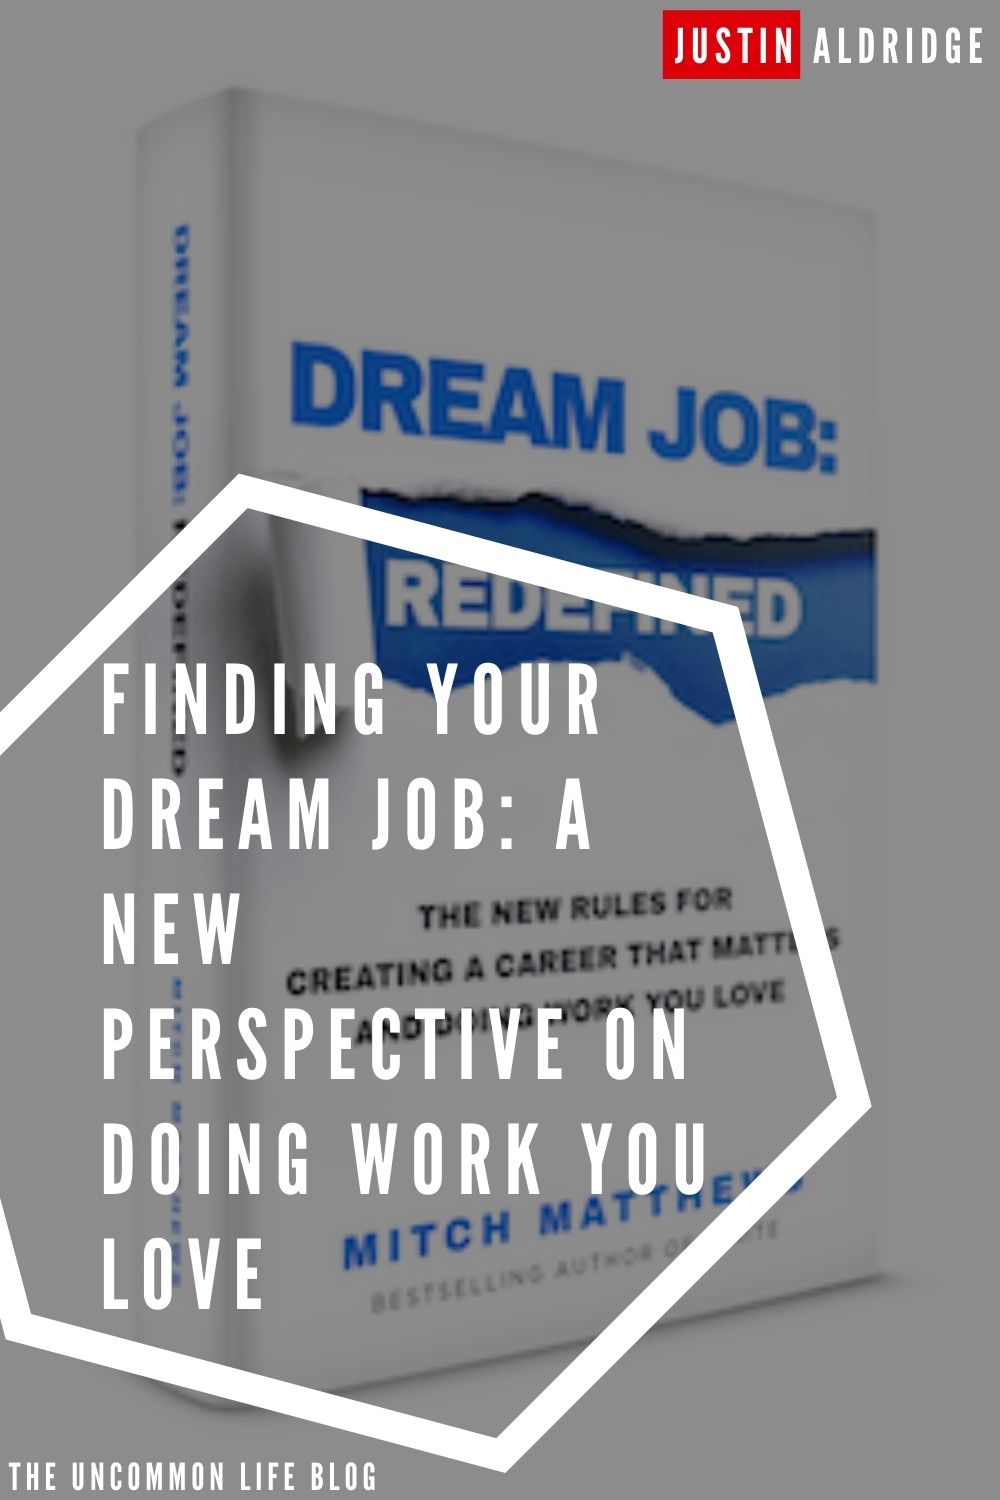 Image of Dream Job Redefined book in the background, behind the text, "Finding your dream job: a new perspective on doing work you love"